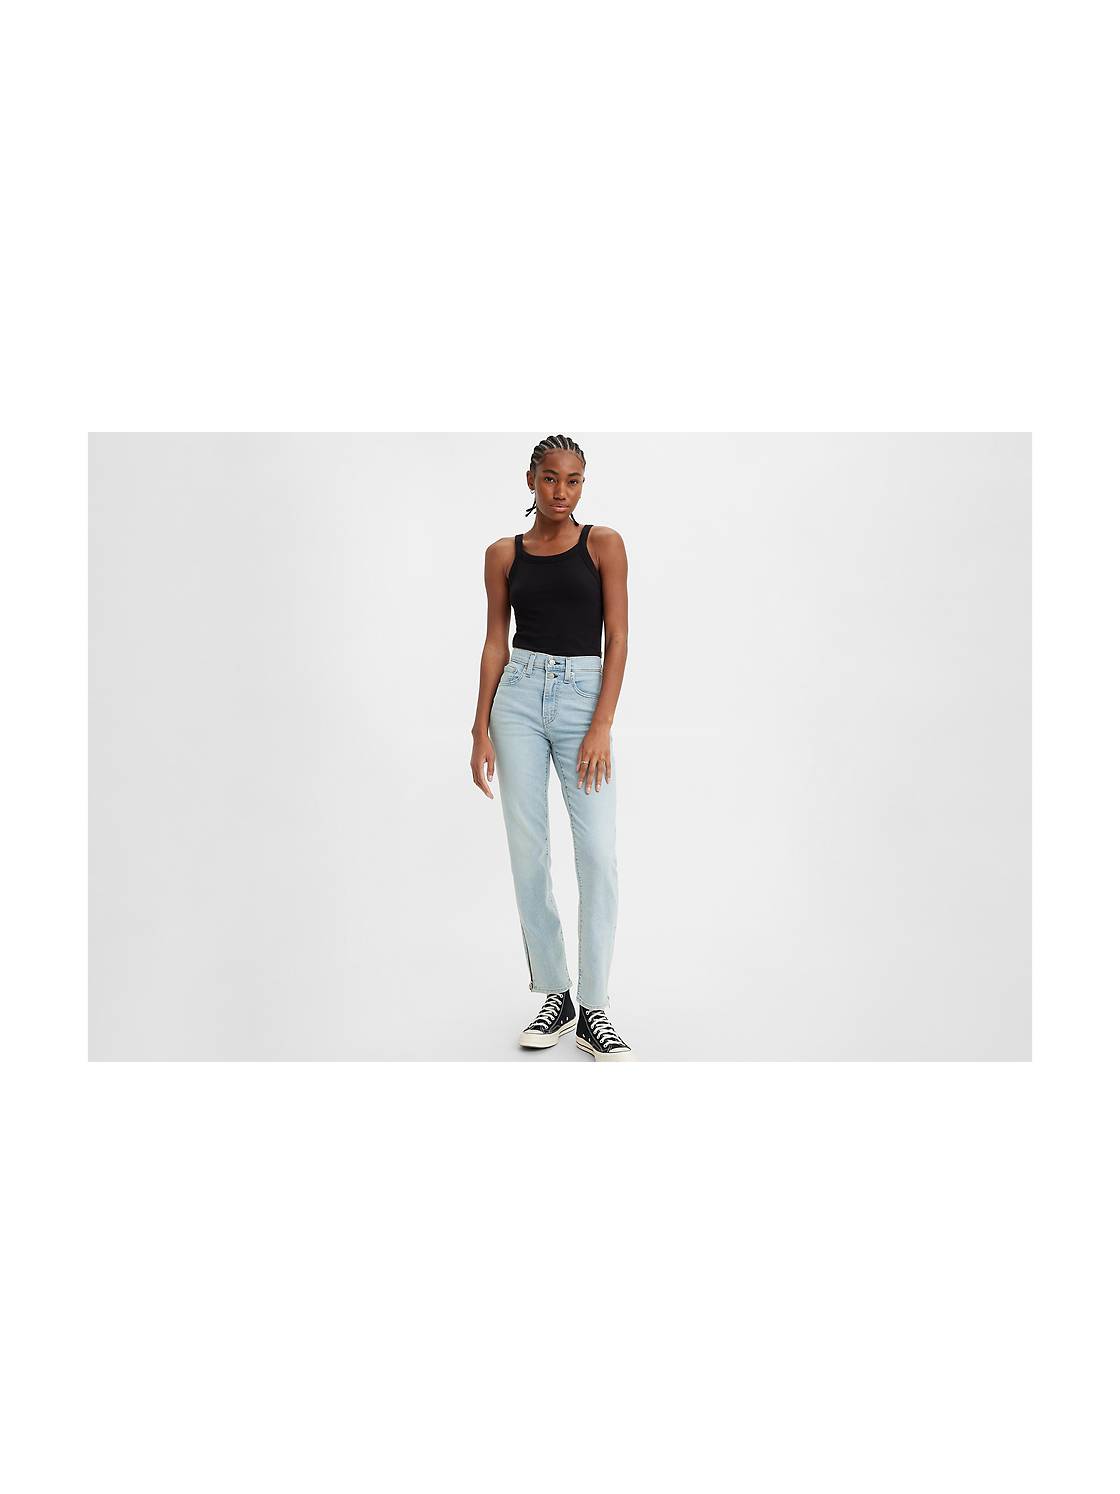 THE LIA HIGH RISE STRAIGHT LEG JEANS IN LIGHT WASH